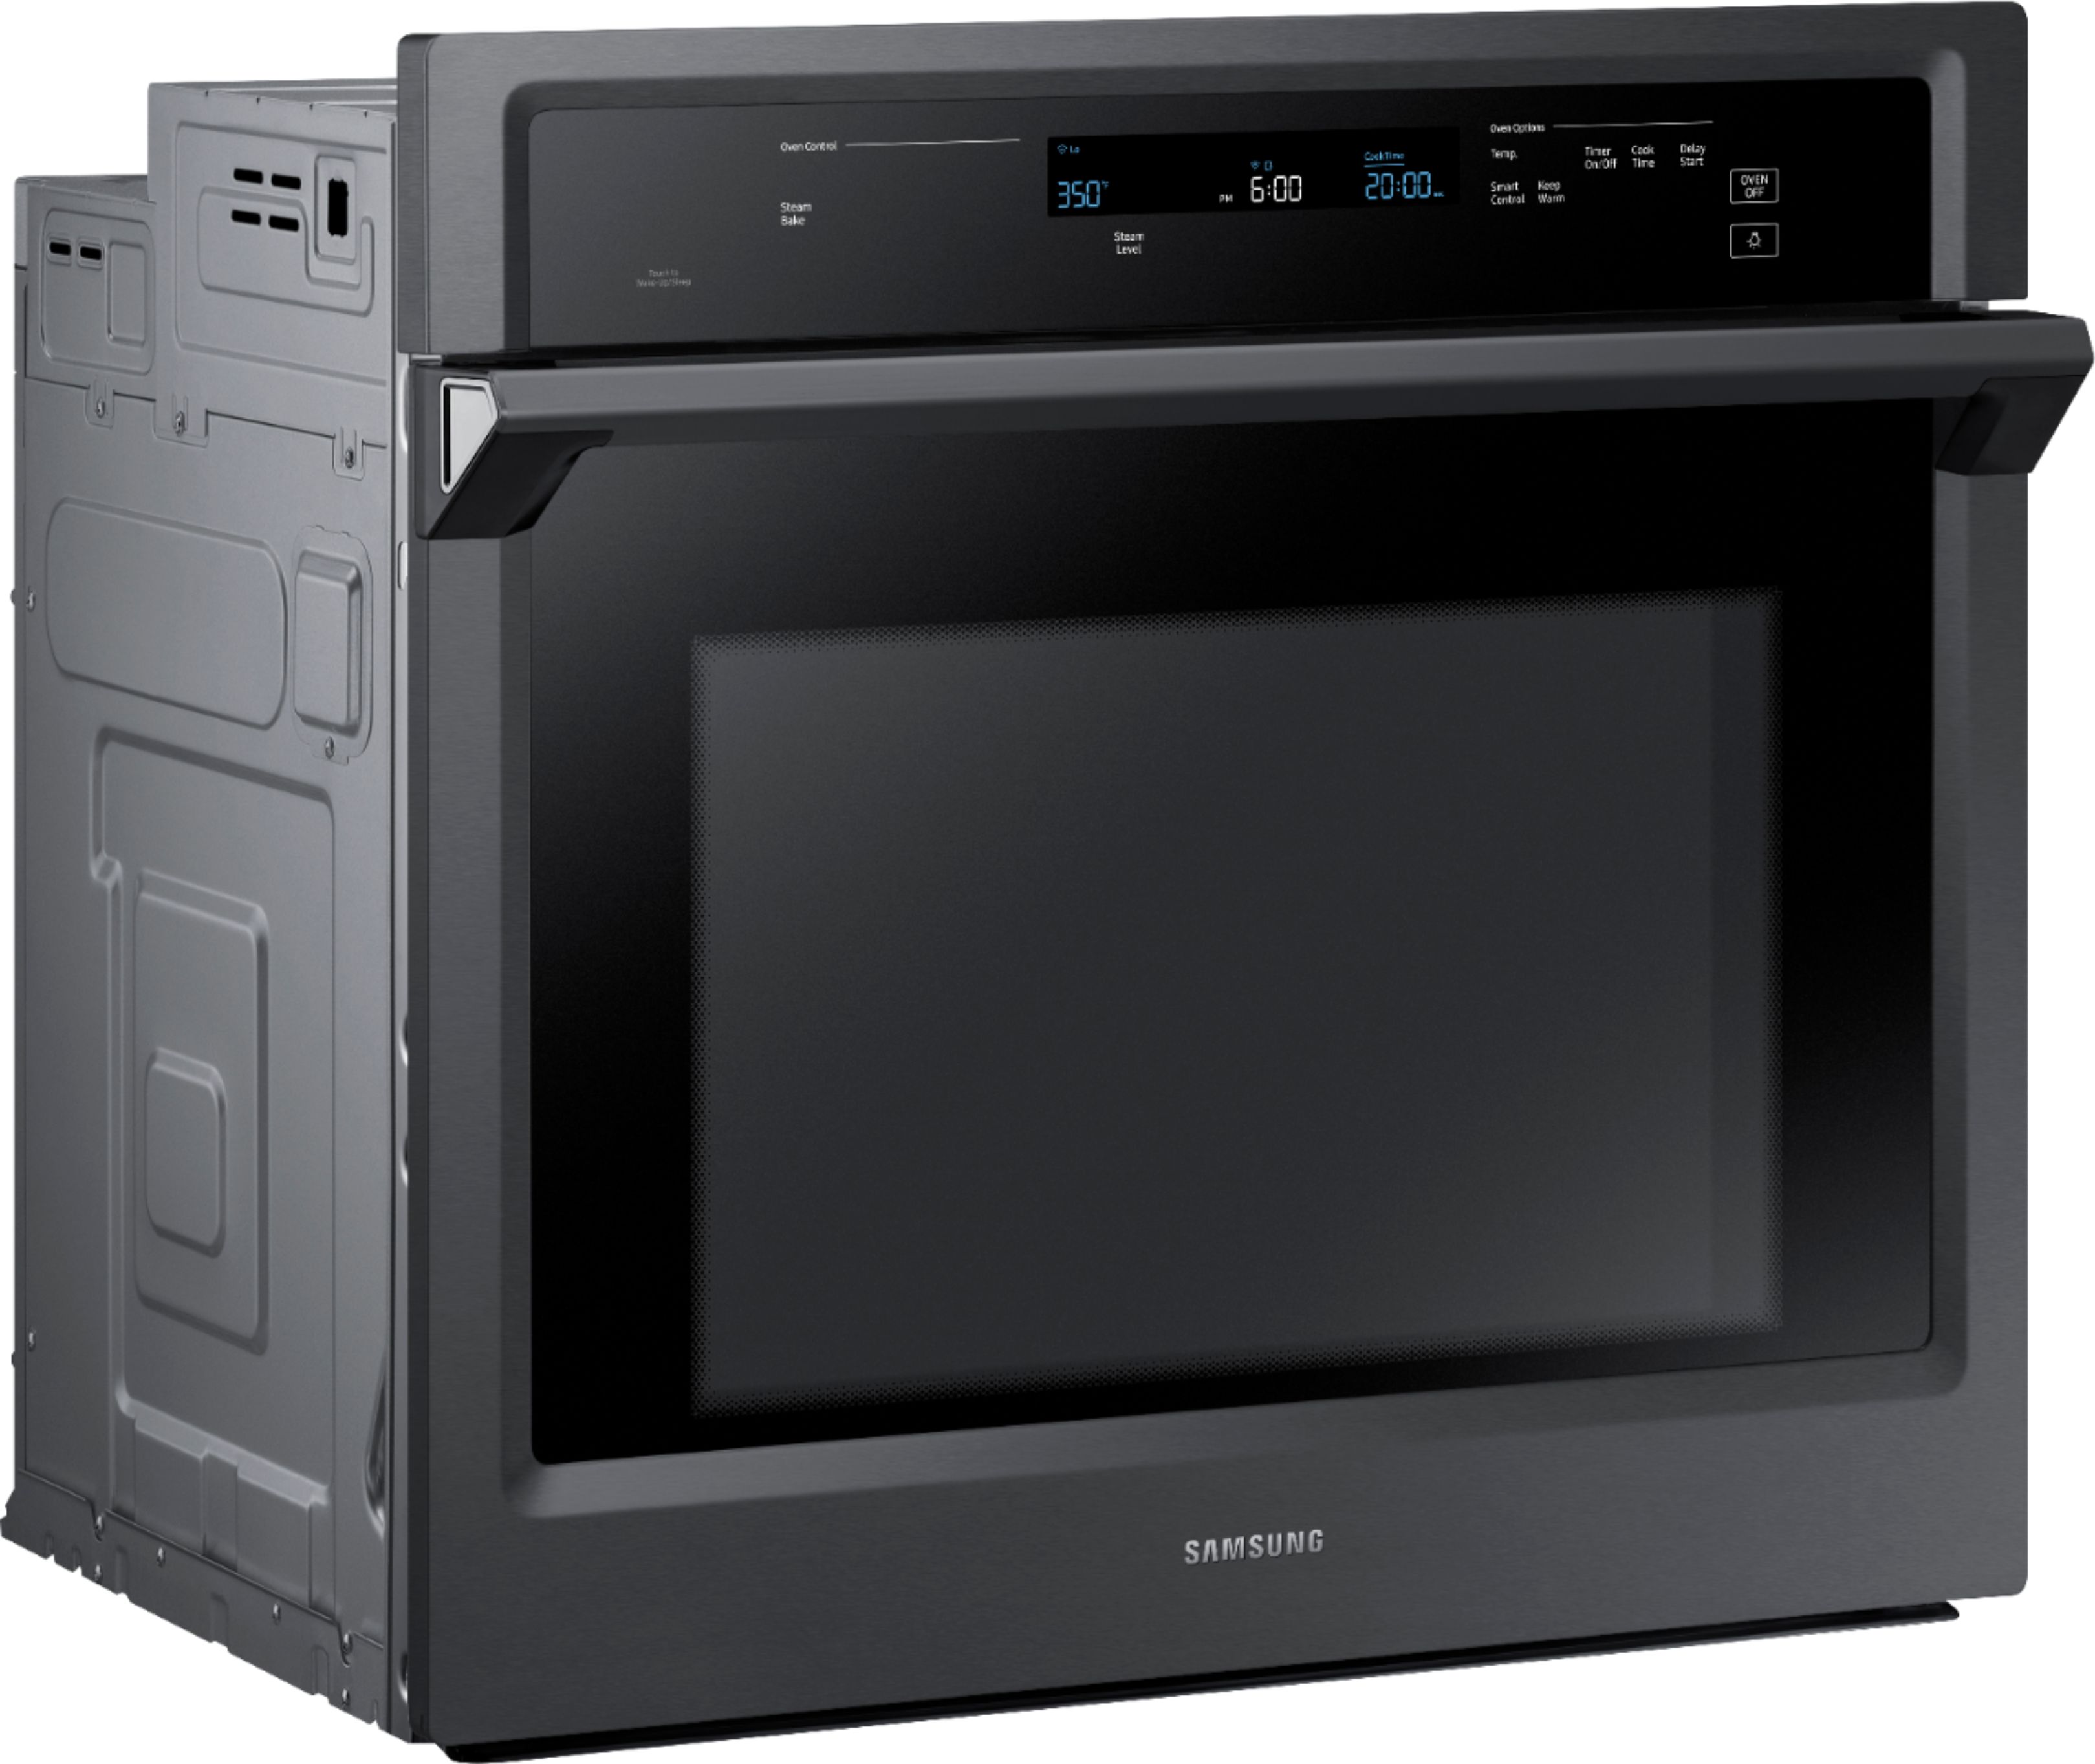 Angle View: Whirlpool - 24" Built-In Single Electric Wall Oven - White